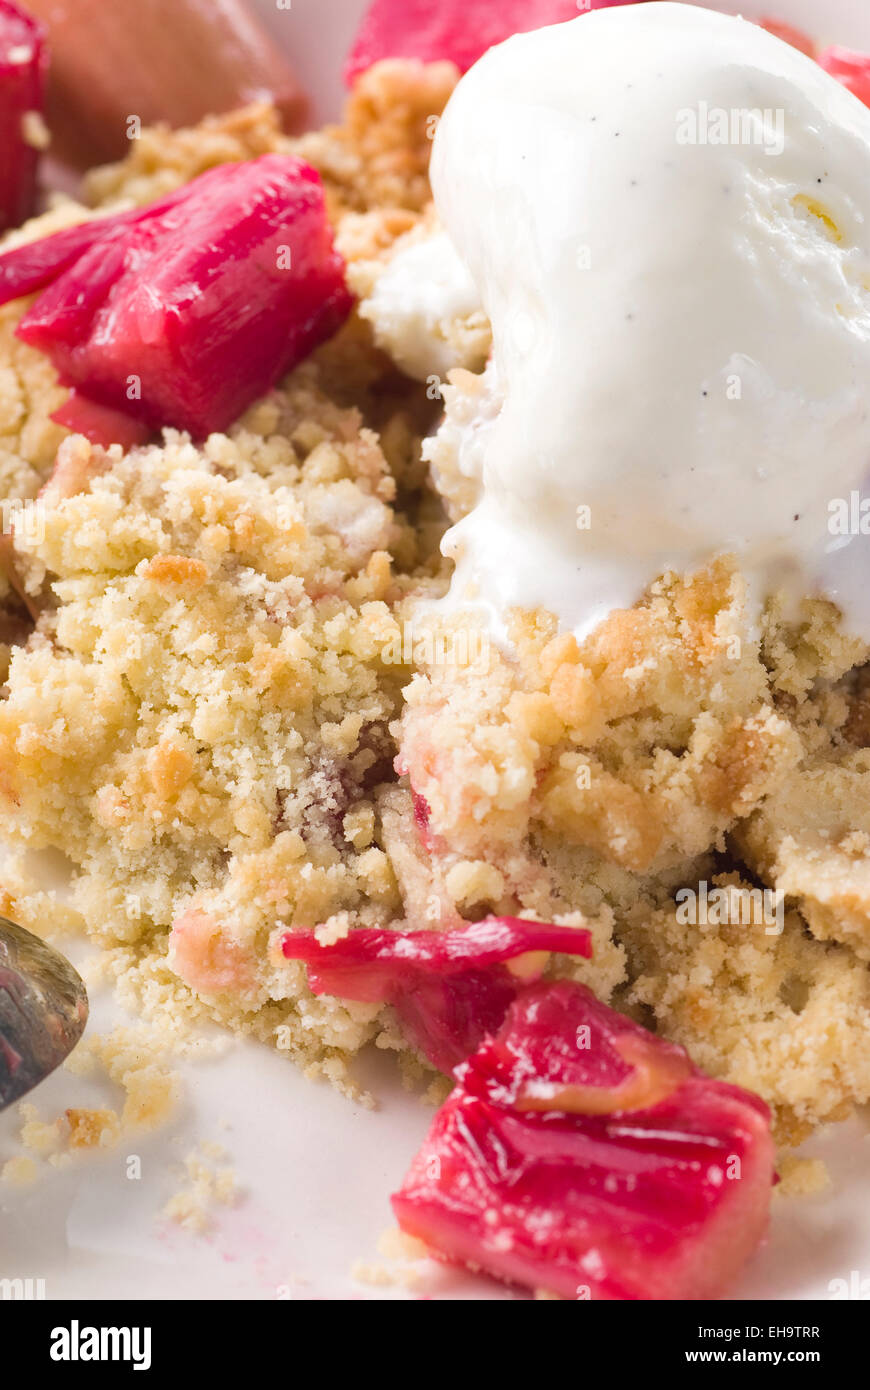 Crumble rhubarbe, glace vanille. Banque D'Images